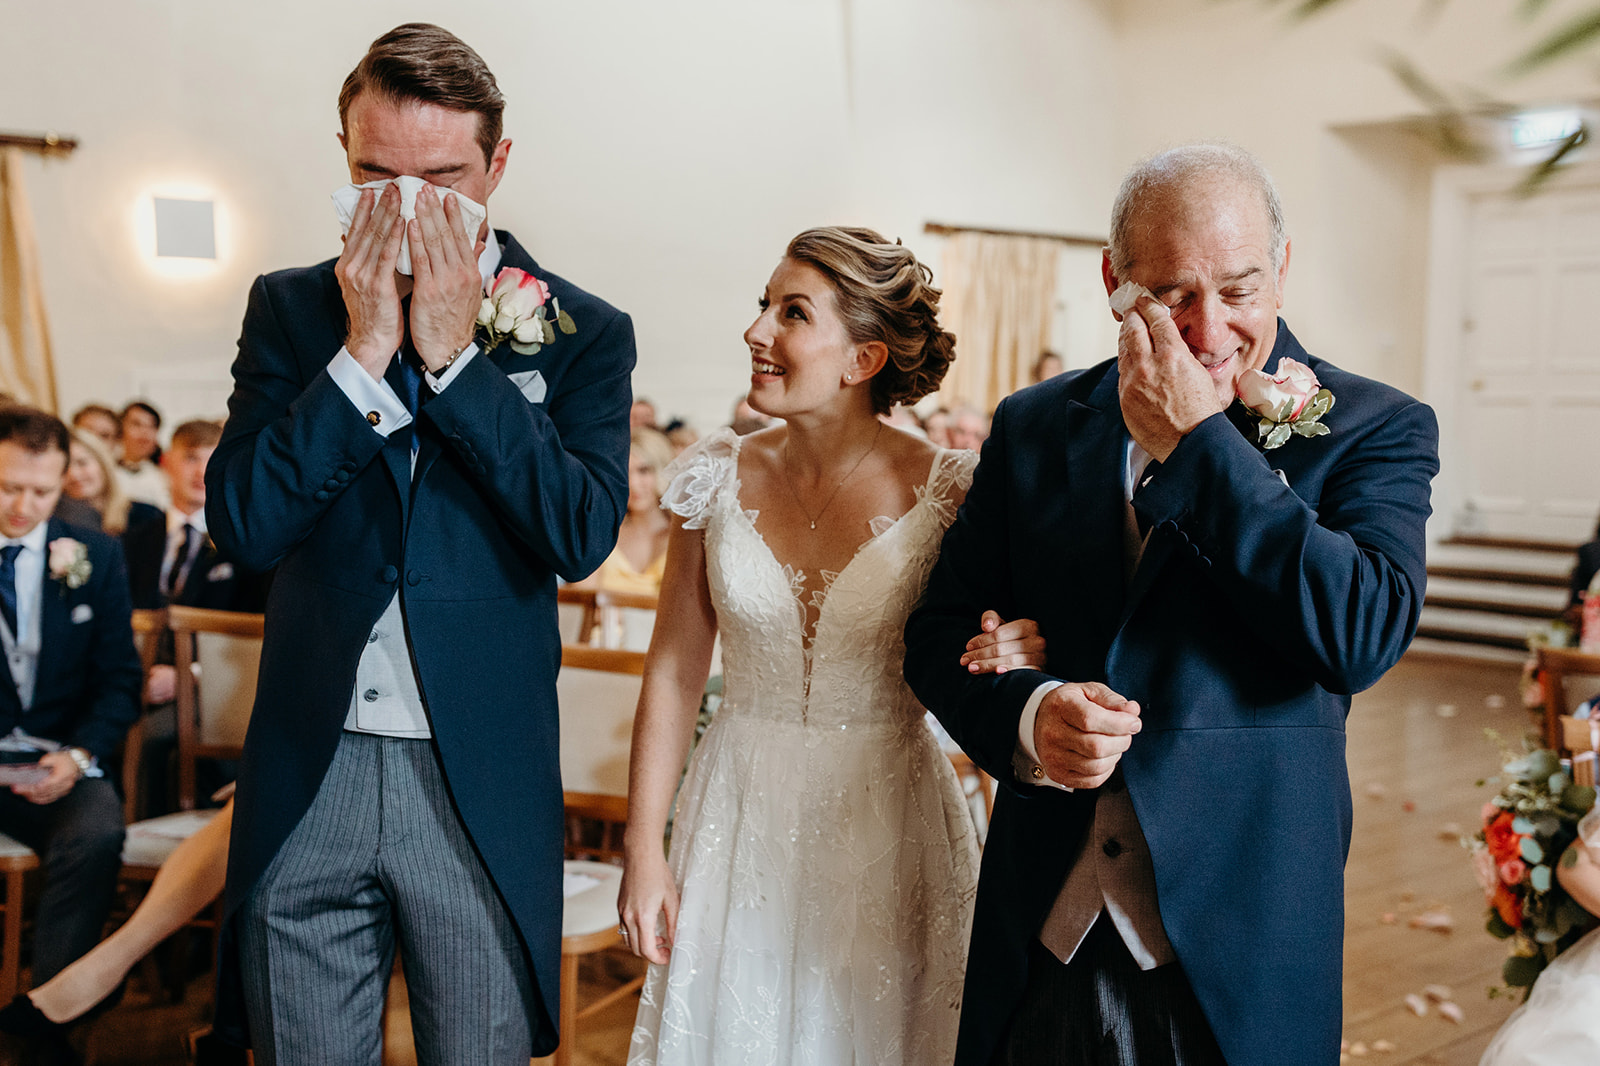 Documentary wedding photograph of a bride walking down the aisle with her smiling father, as the groom covers his face, 